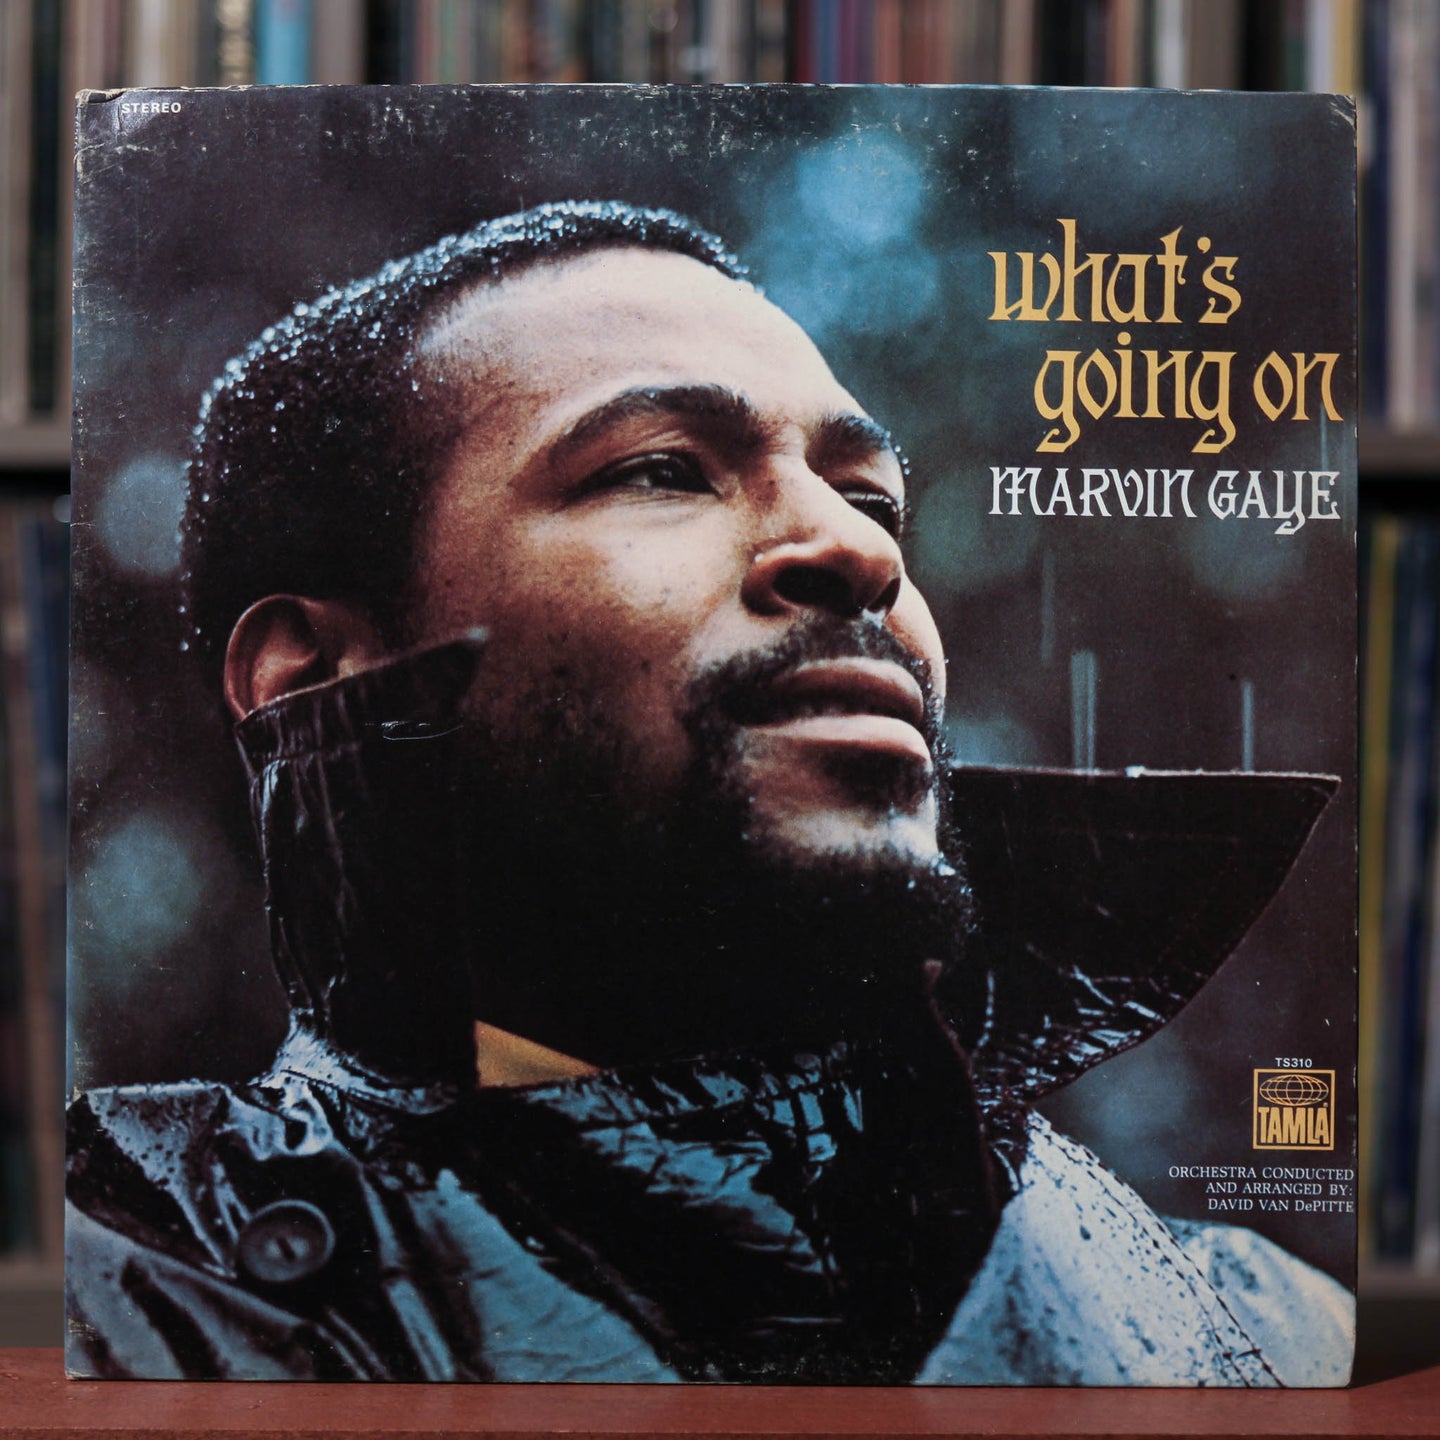 Marvin Gaye - What's Going On - 1971 Tamla, VG+/EX